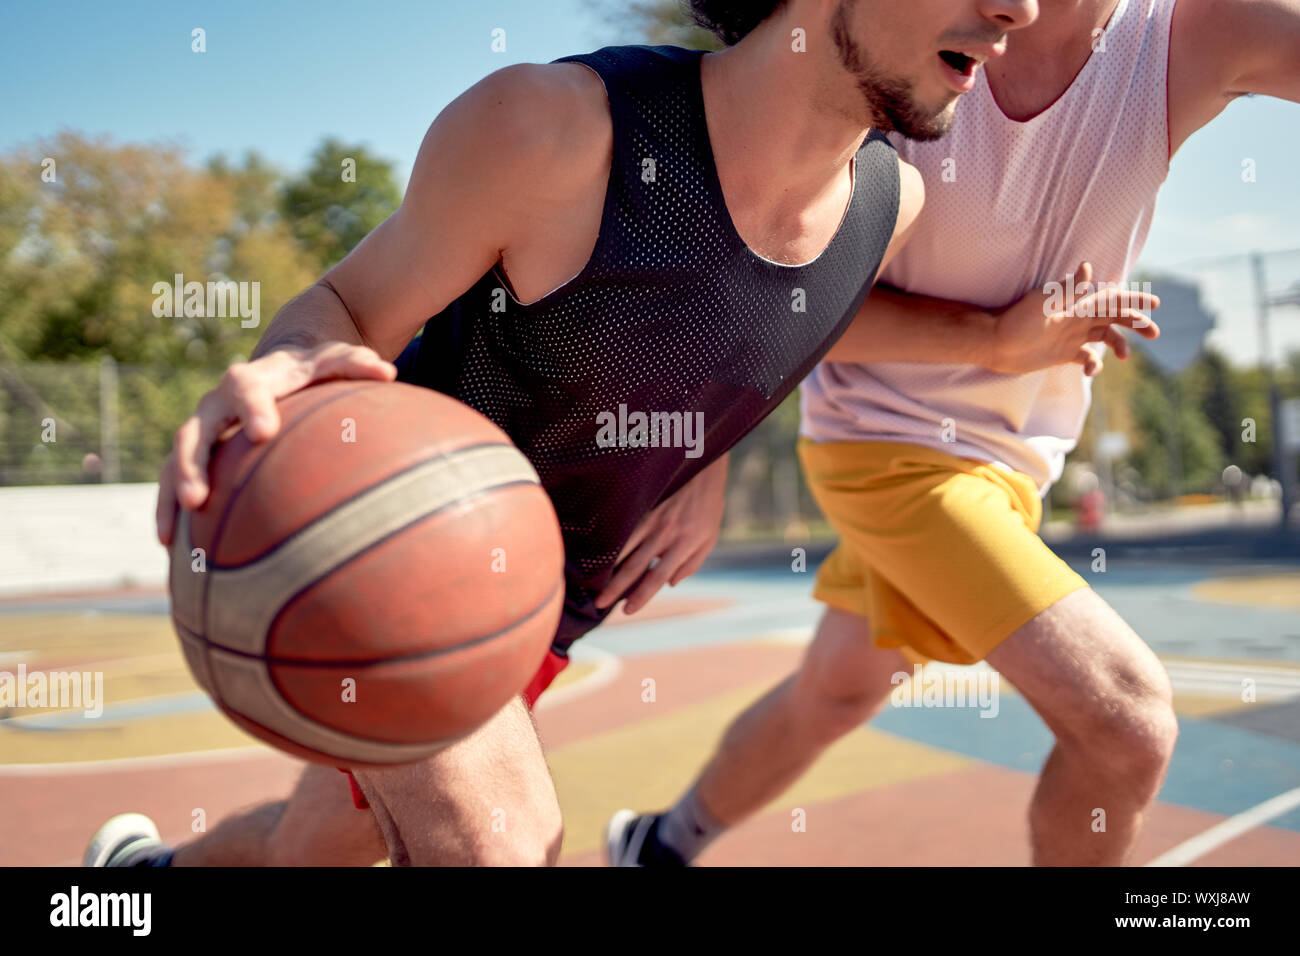 Photo of young athletes playing basketball on playground on summer day against background of green trees Stock Photo